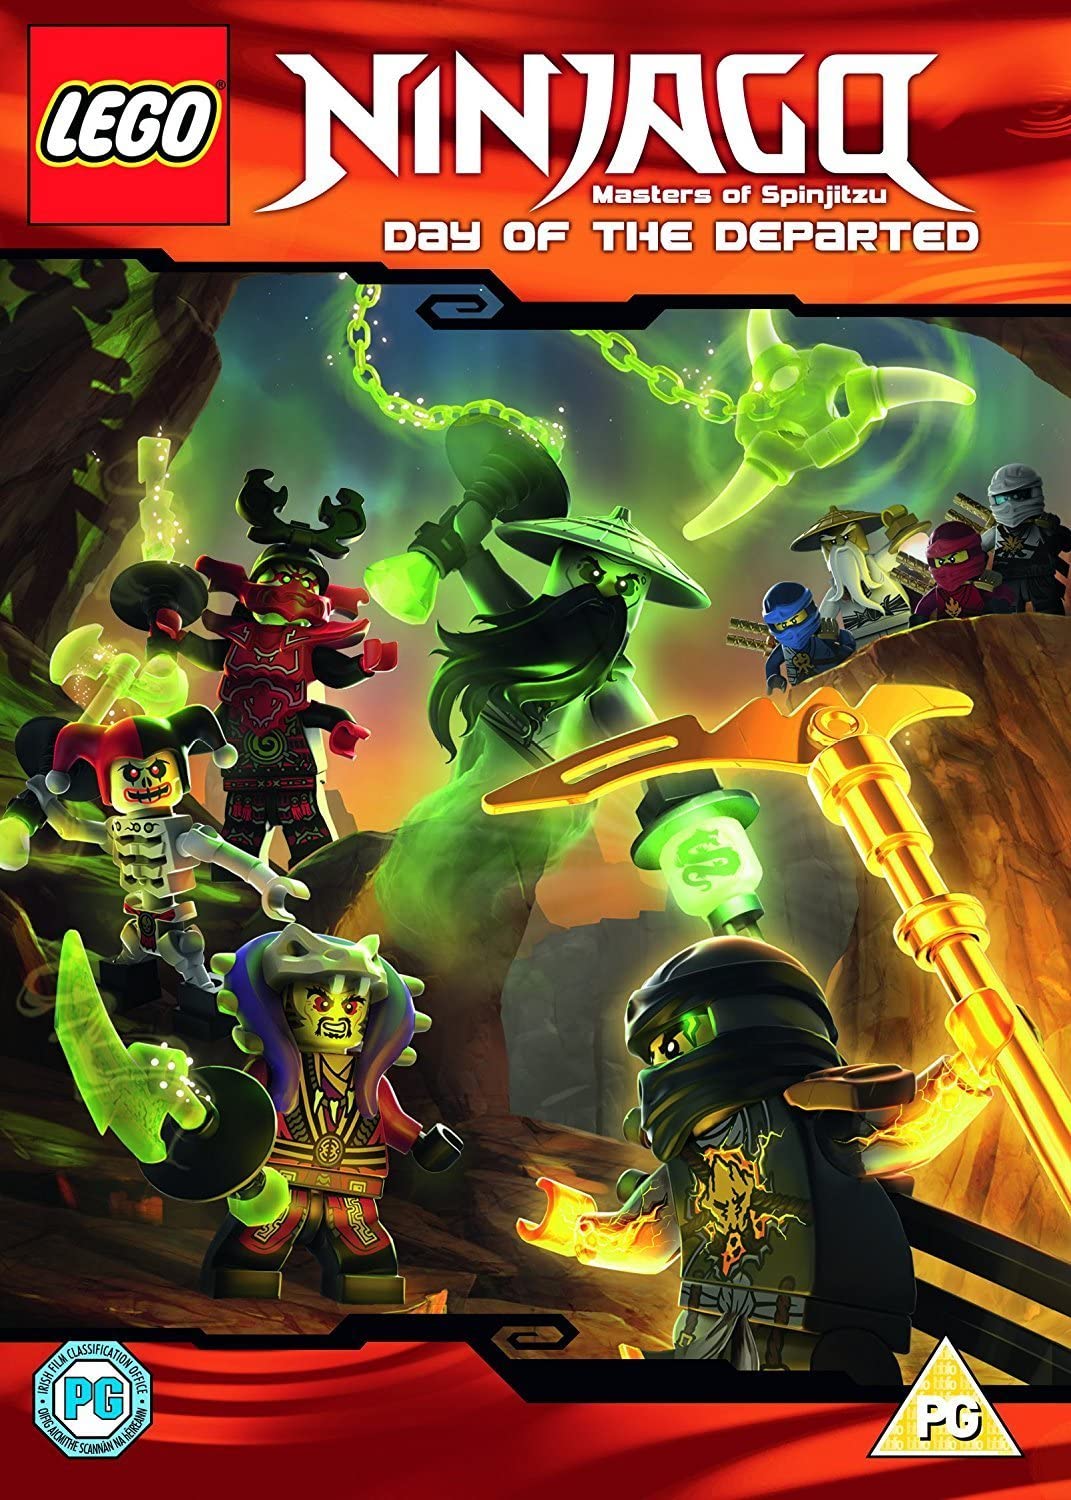 LEGO NINJAGO: DAY OF DEPARTED S) [2018] – Abenteuer/Familie [DVD]